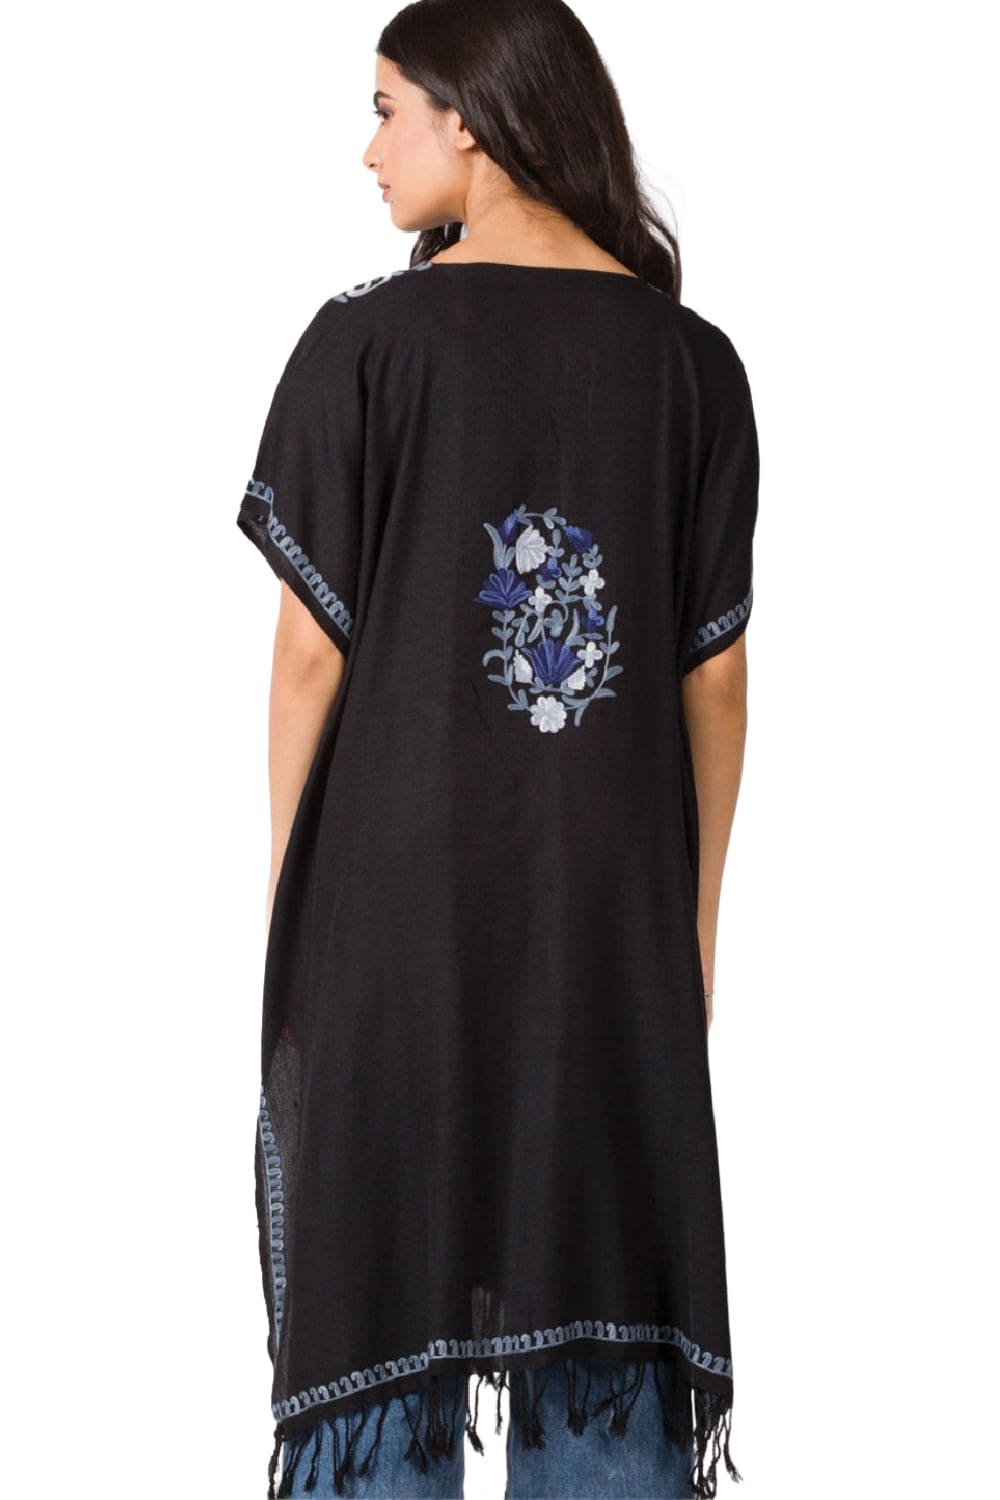 Women's Kaftan with blue embroidery.